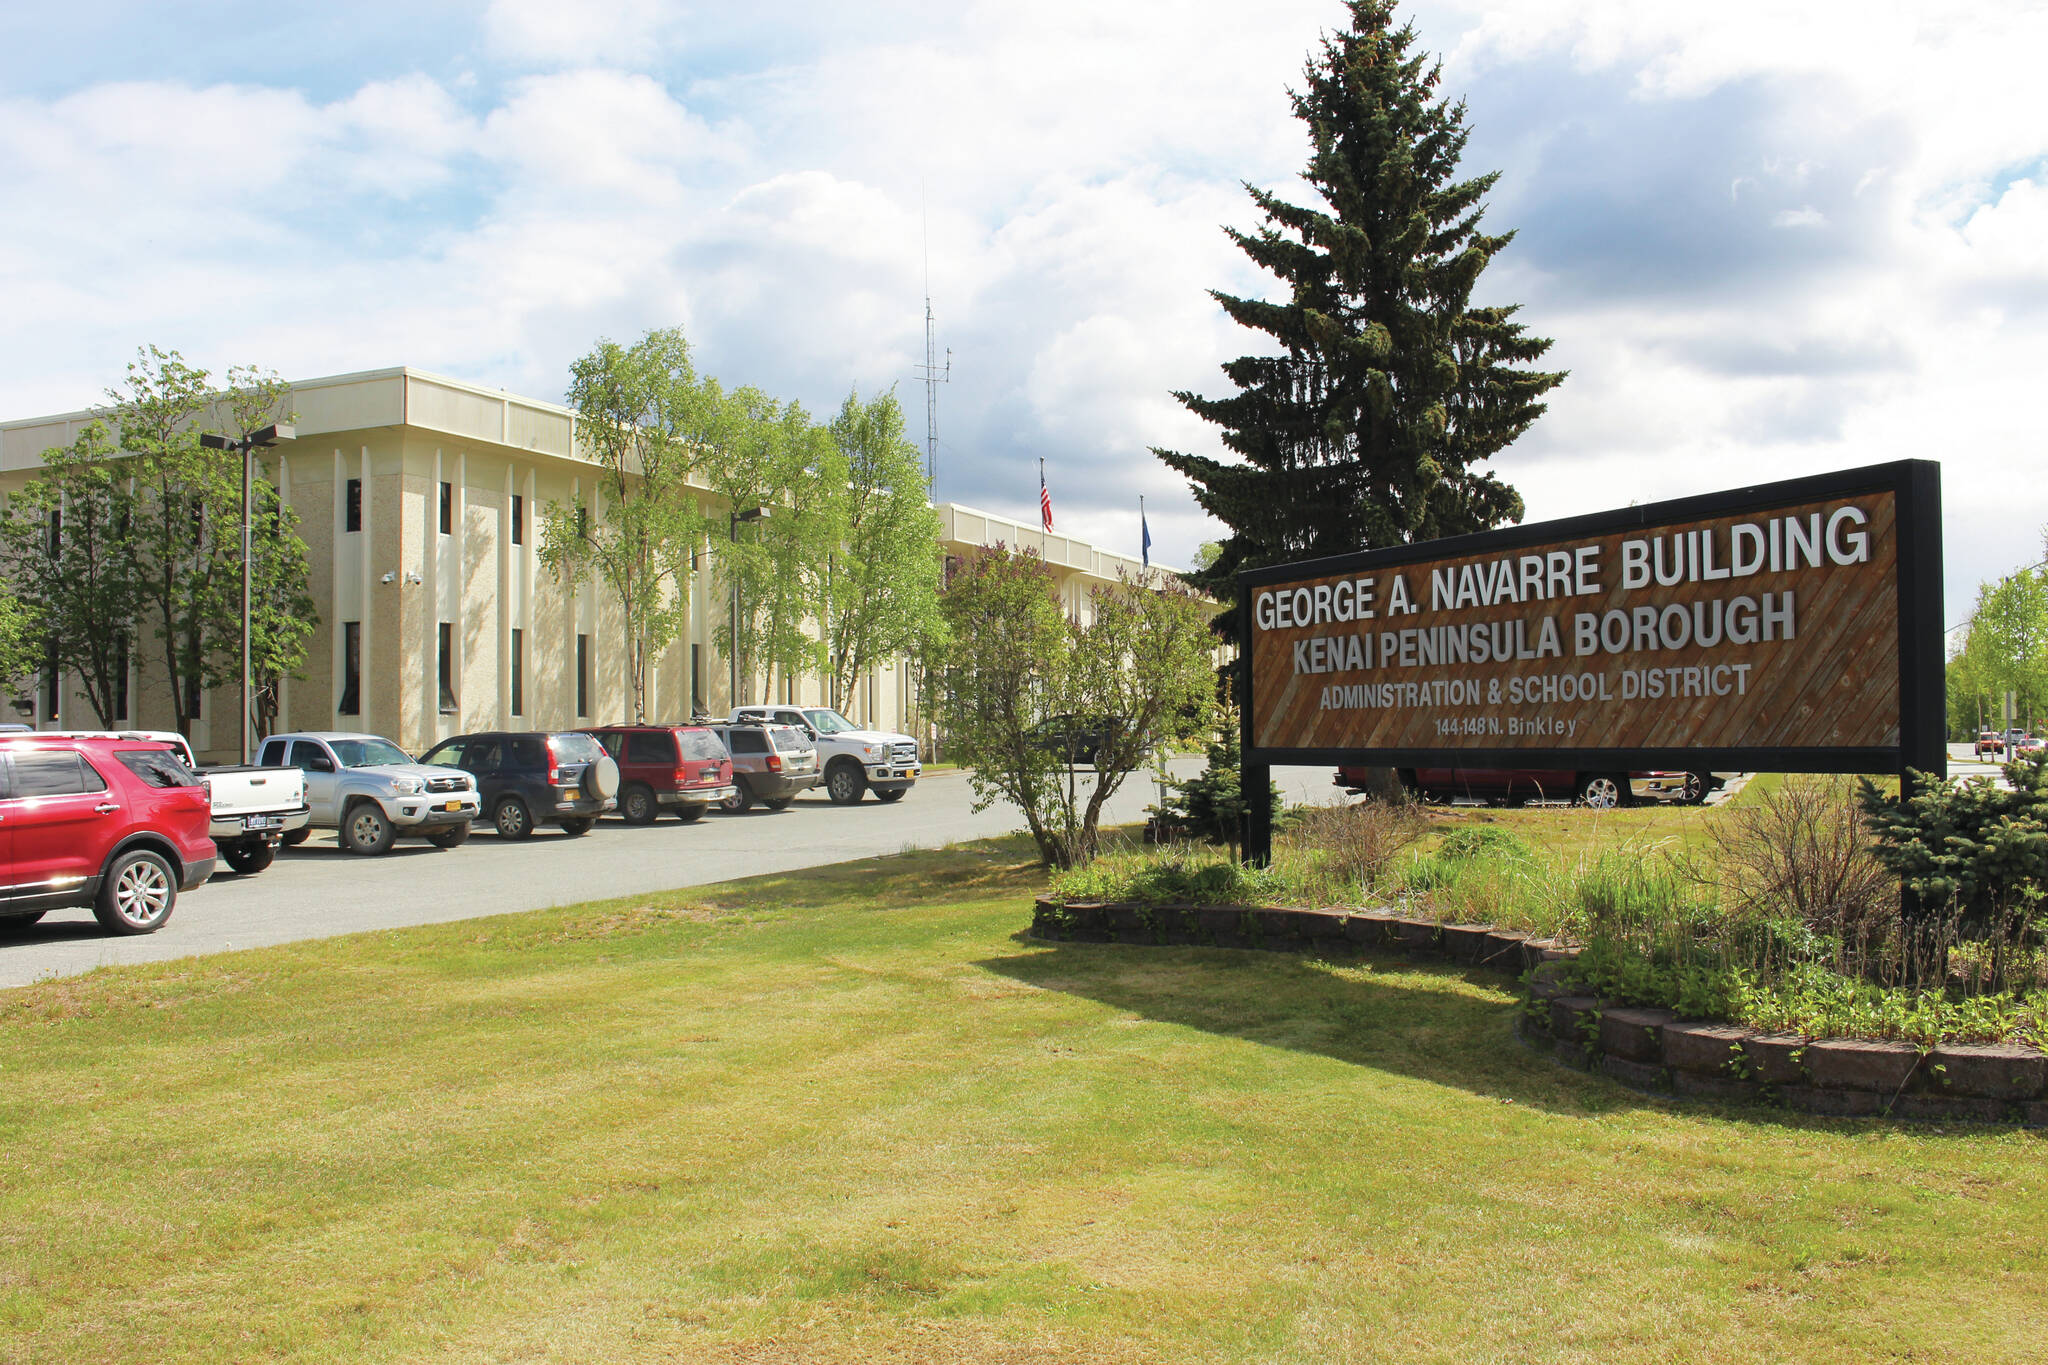 The entrance to the Kenai Peninsula Borough building in Soldotna is seen here on June 1. (Photo by Brian Mazurek/Peninsula Clarion)